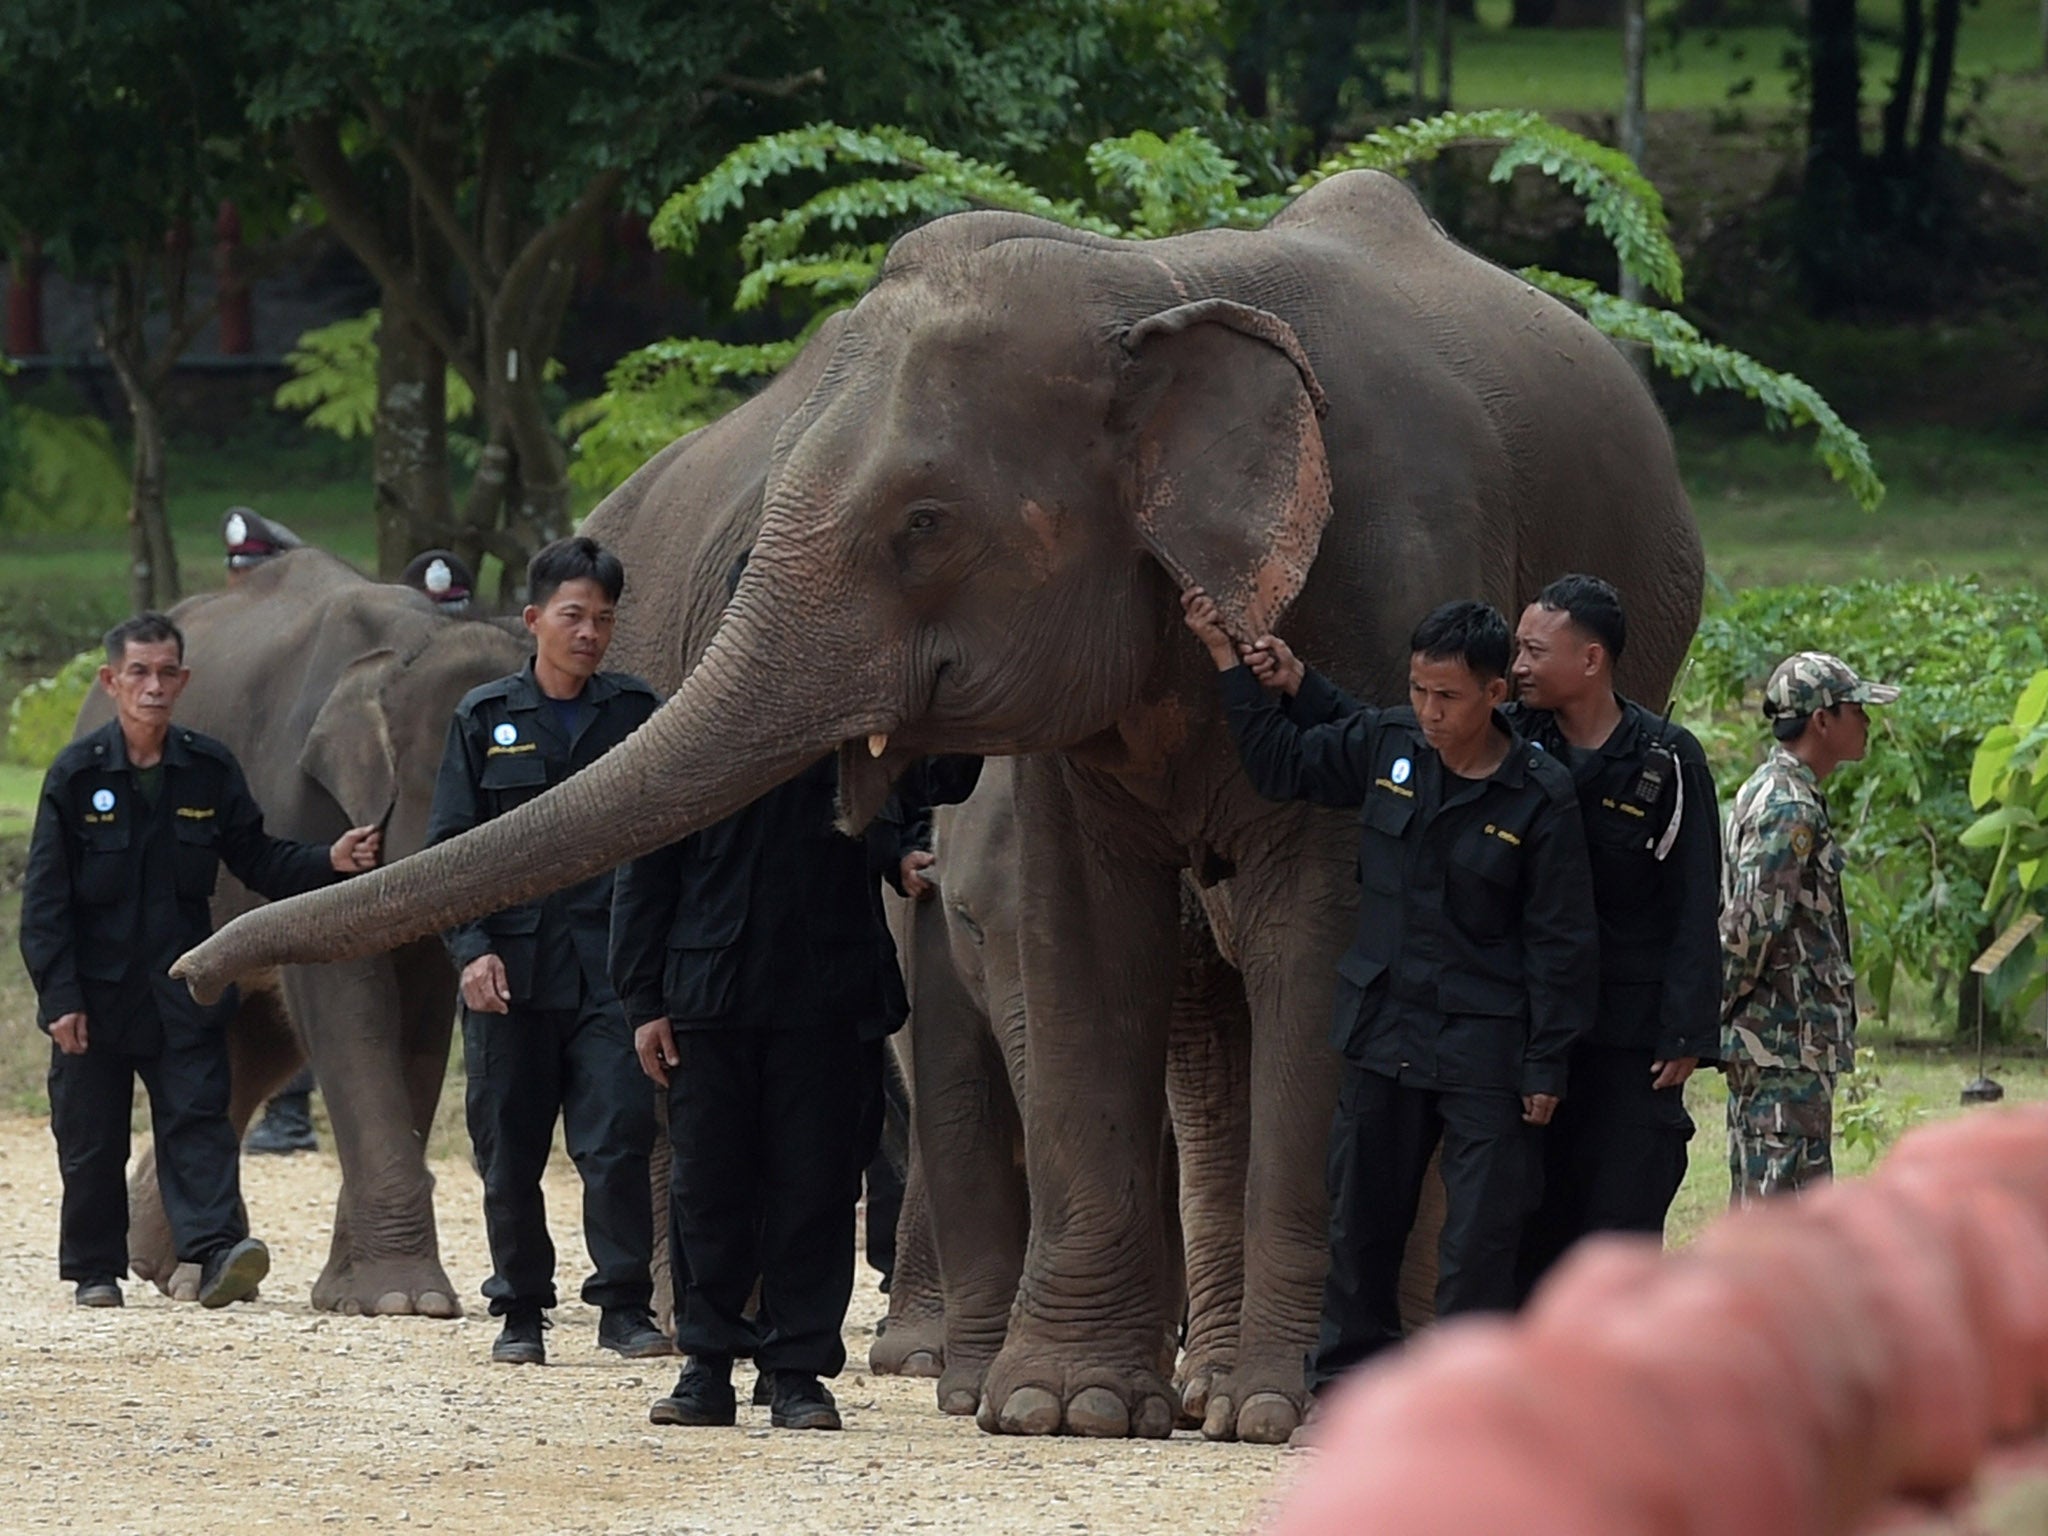 World Animal Protection says elephants in Thailand are not supposed to be ridden